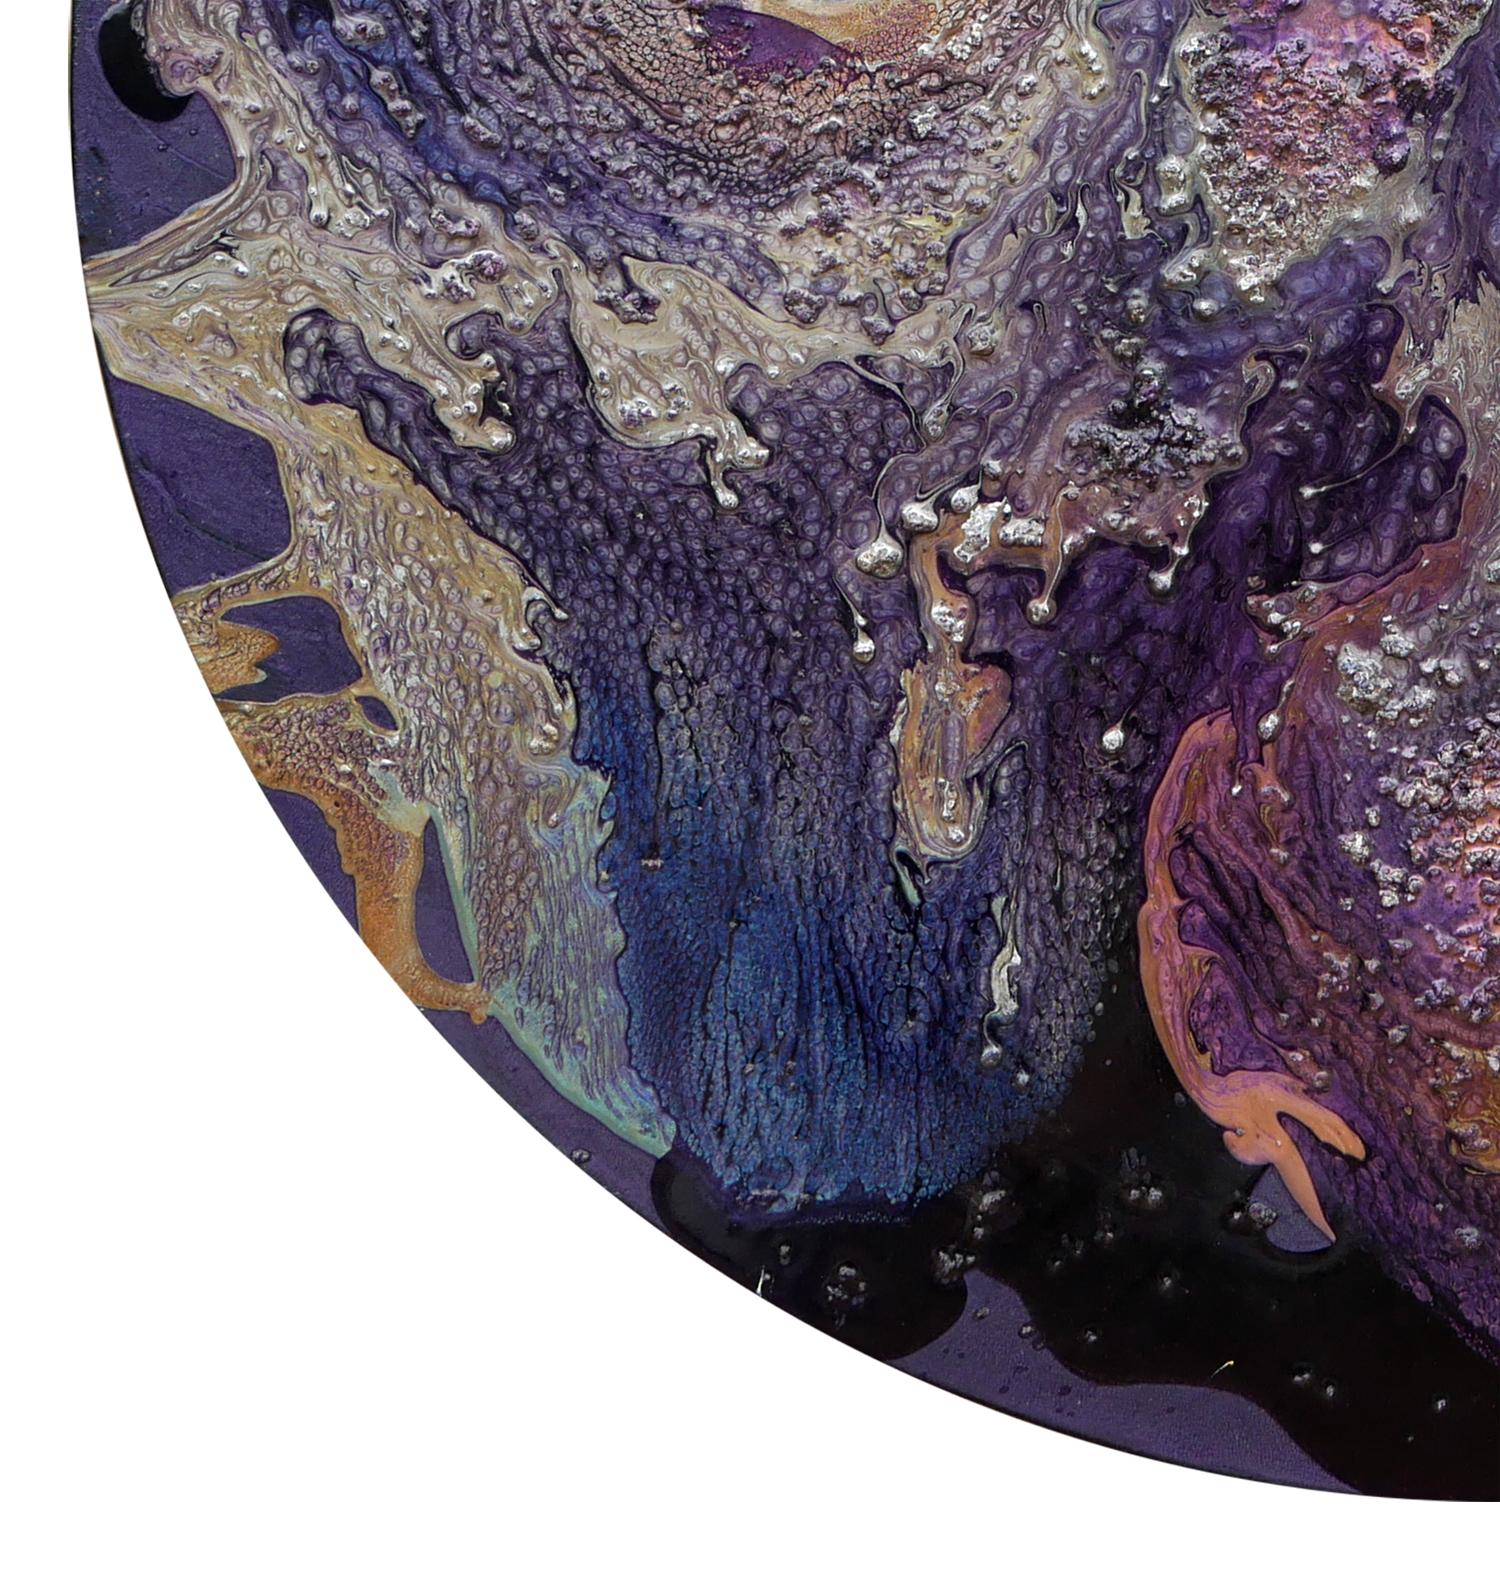 Deep purple and gold abstract mixed-media painting by Hawaii-based artist, Èlan Vital. This round piece depicts a deep, almost three-dimensional painting achieved through layers of pigments. Small stone-like details create texture throughout the